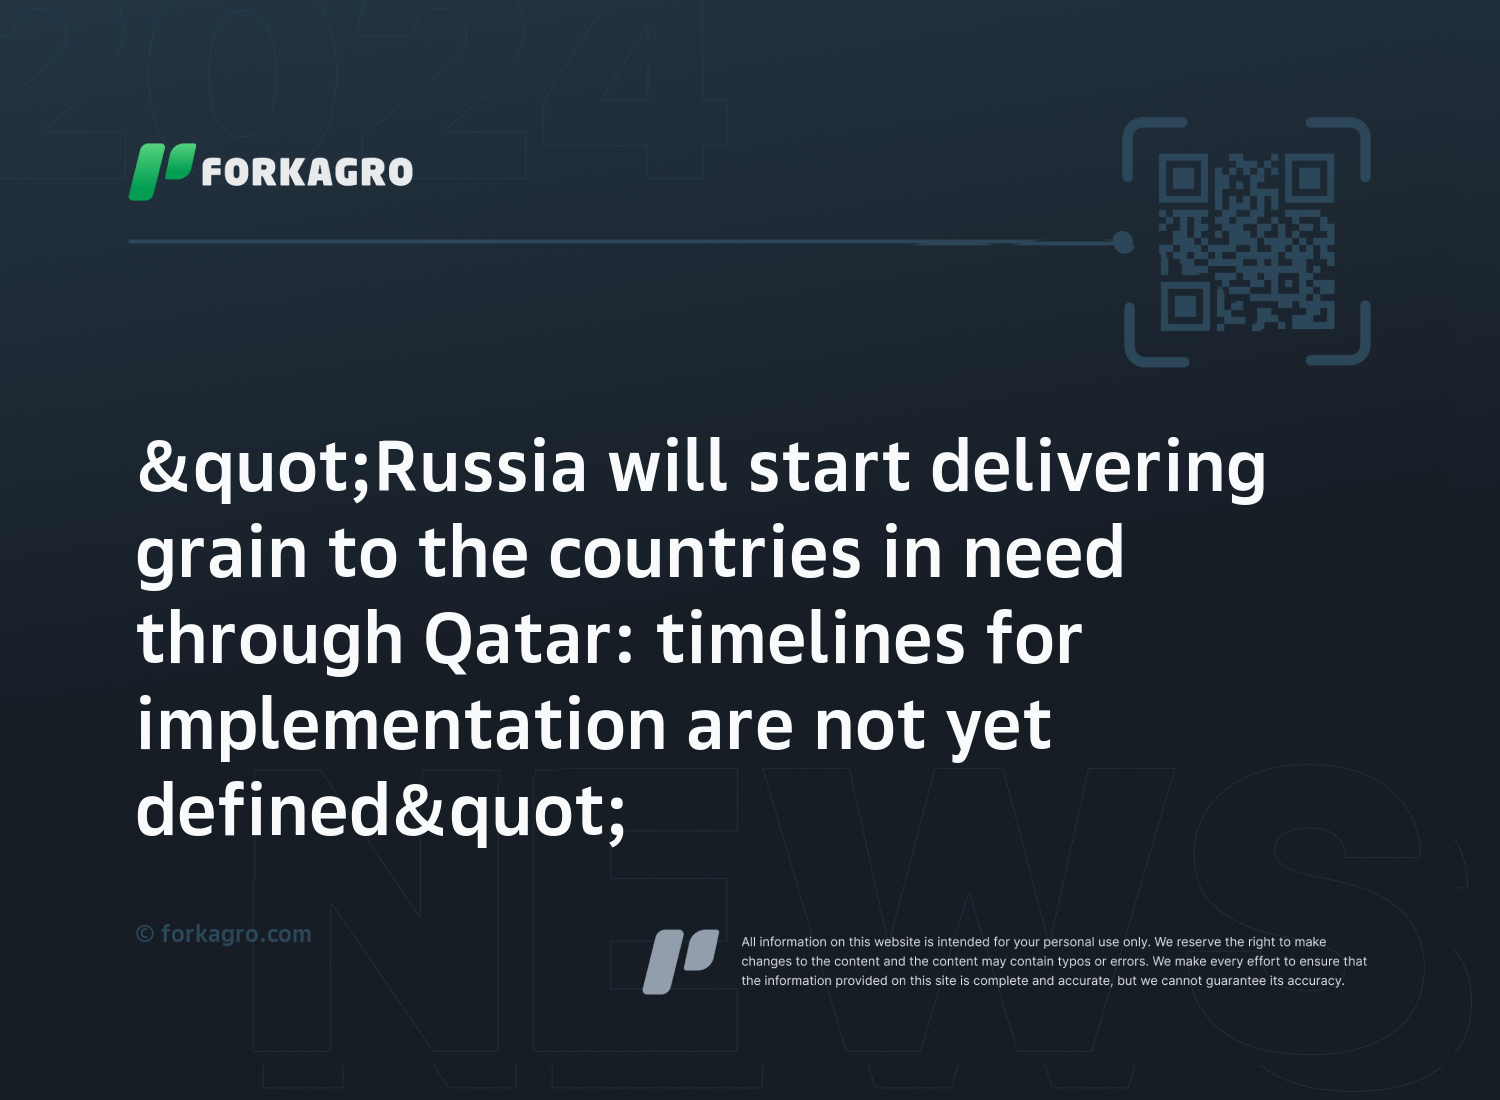 "Russia will start delivering grain to the countries in need through Qatar: timelines for implementation are not yet defined"